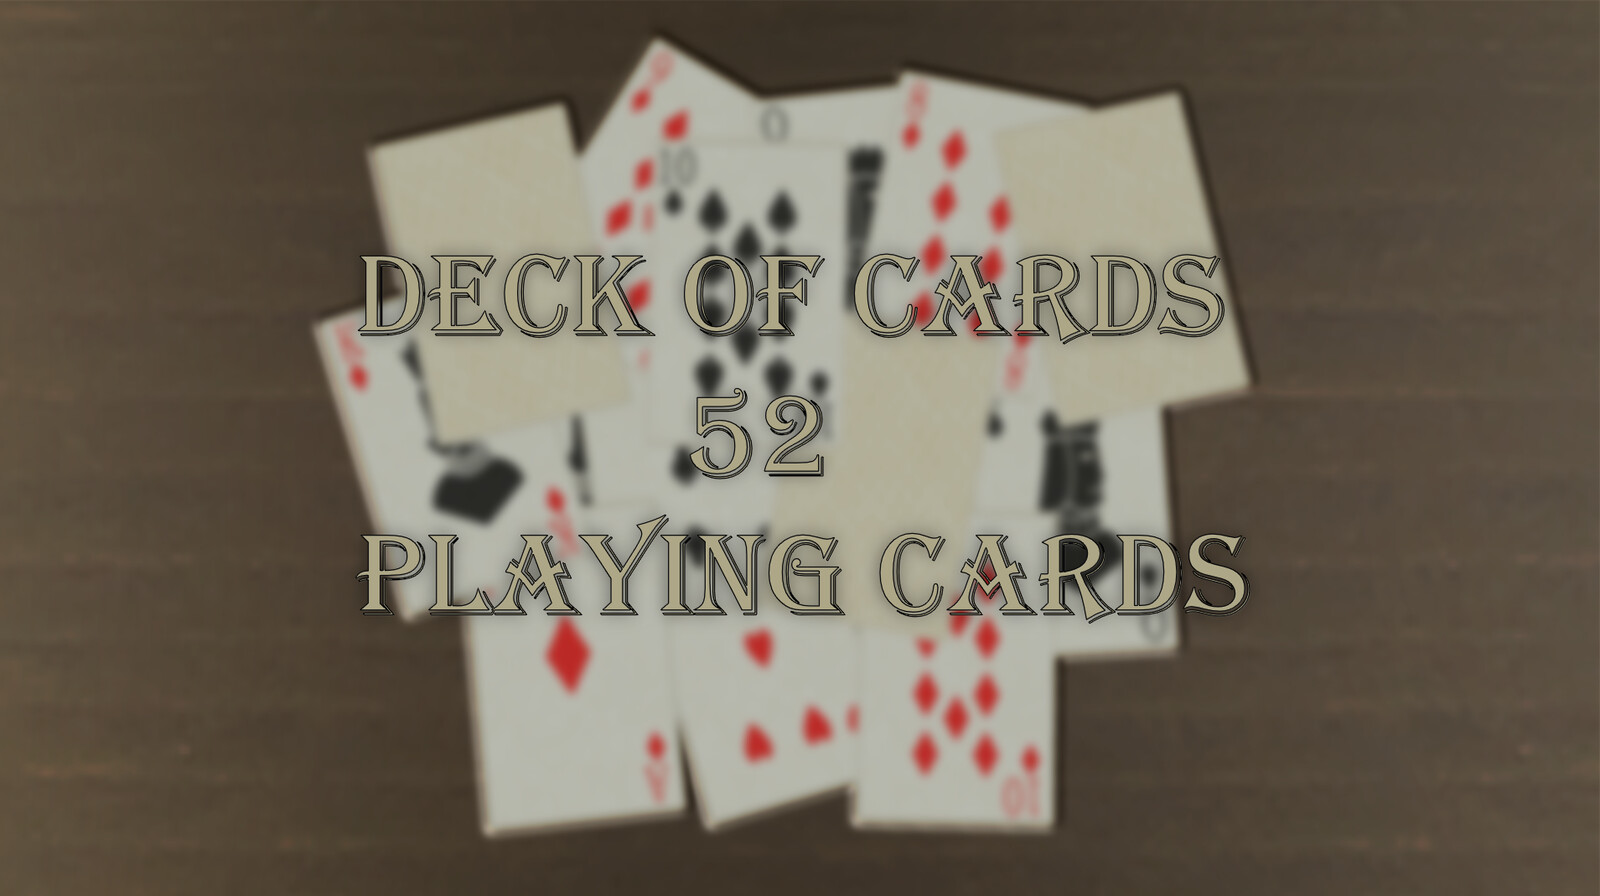 Deck of 52 playing cards